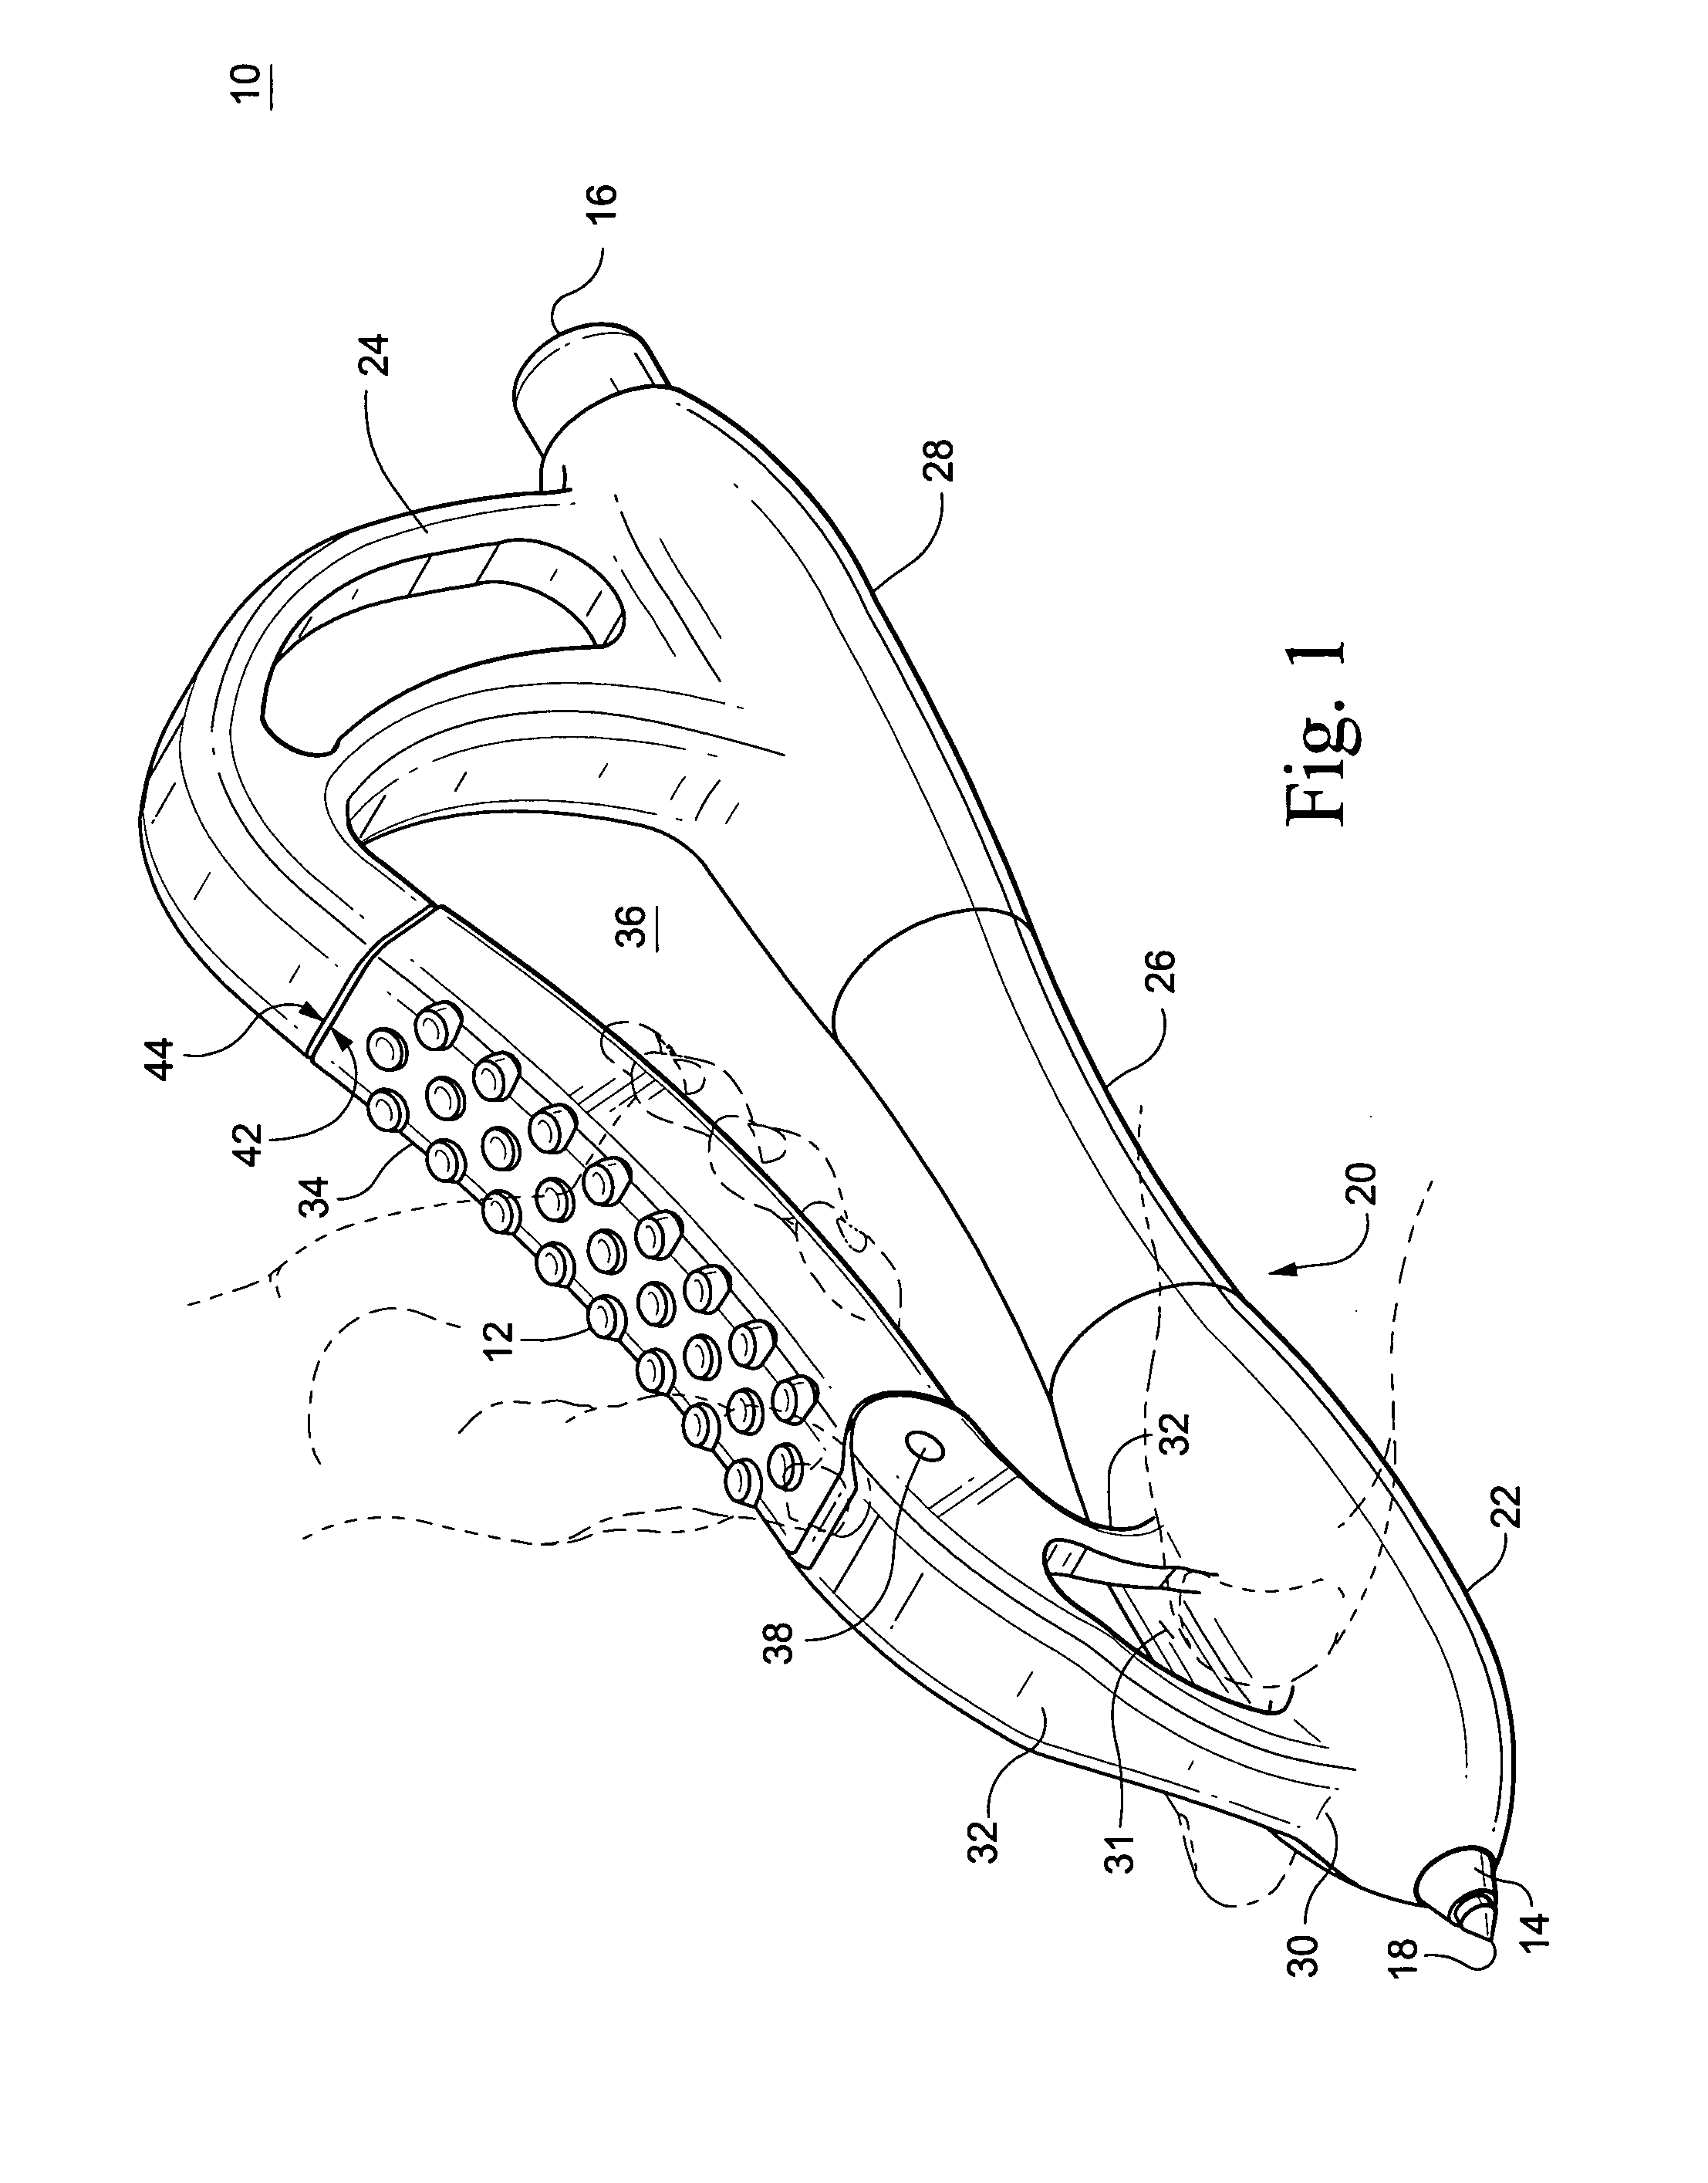 Writing instrument with enclosing structure